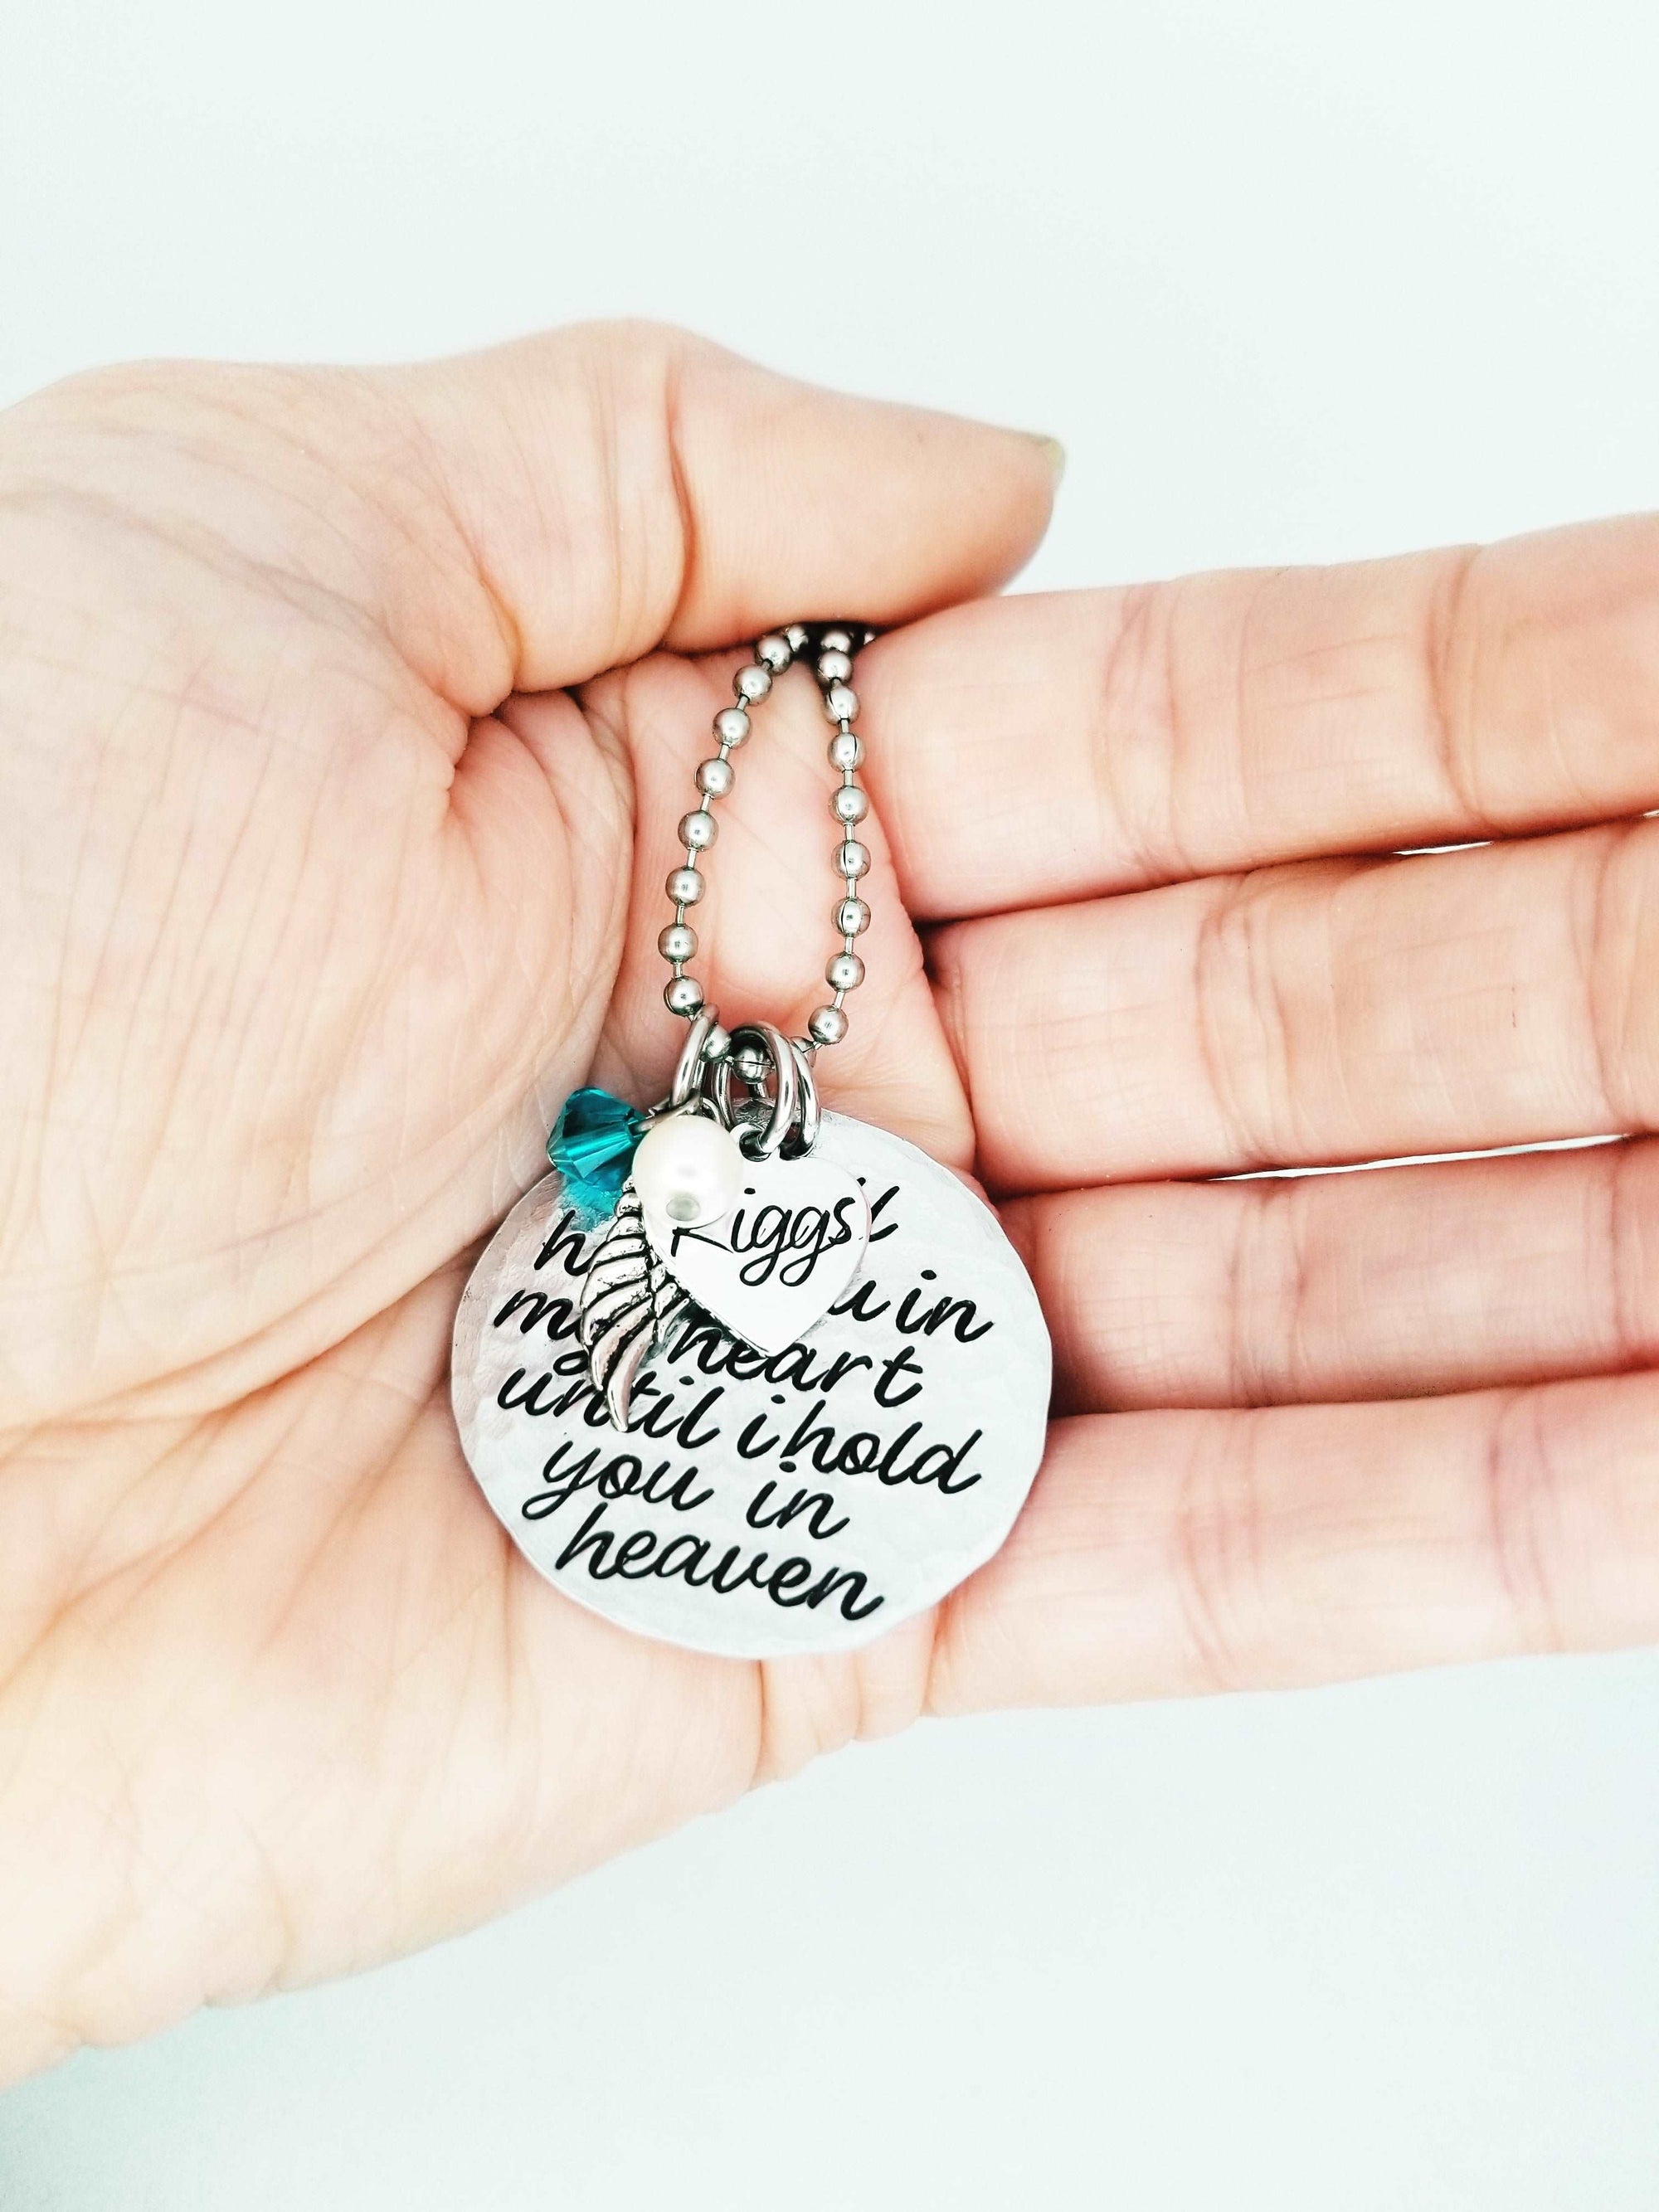 Hold You In My Heart, Memorial Necklace, Infant Loss, Child, 46% OFF